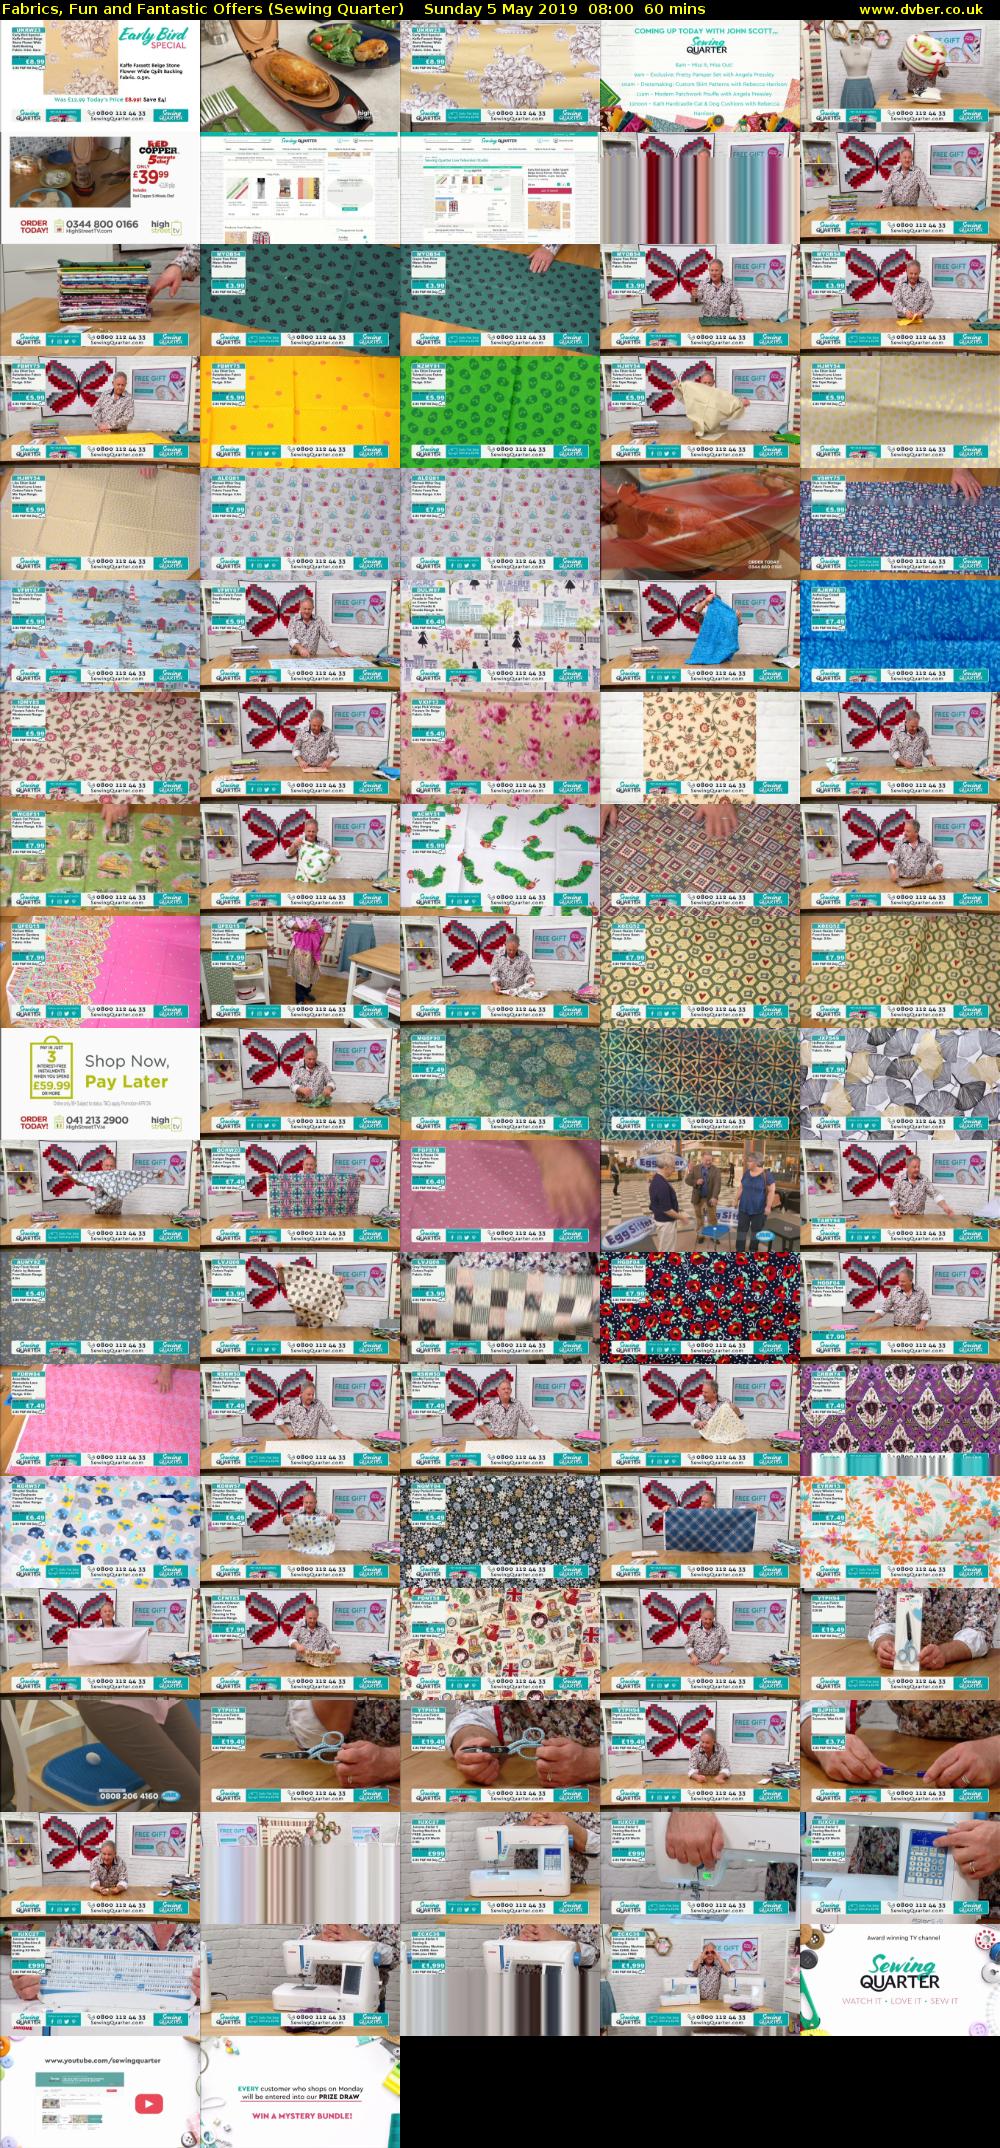 Fabrics, Fun and Fantastic Offers (Sewing Quarter) Sunday 5 May 2019 08:00 - 09:00